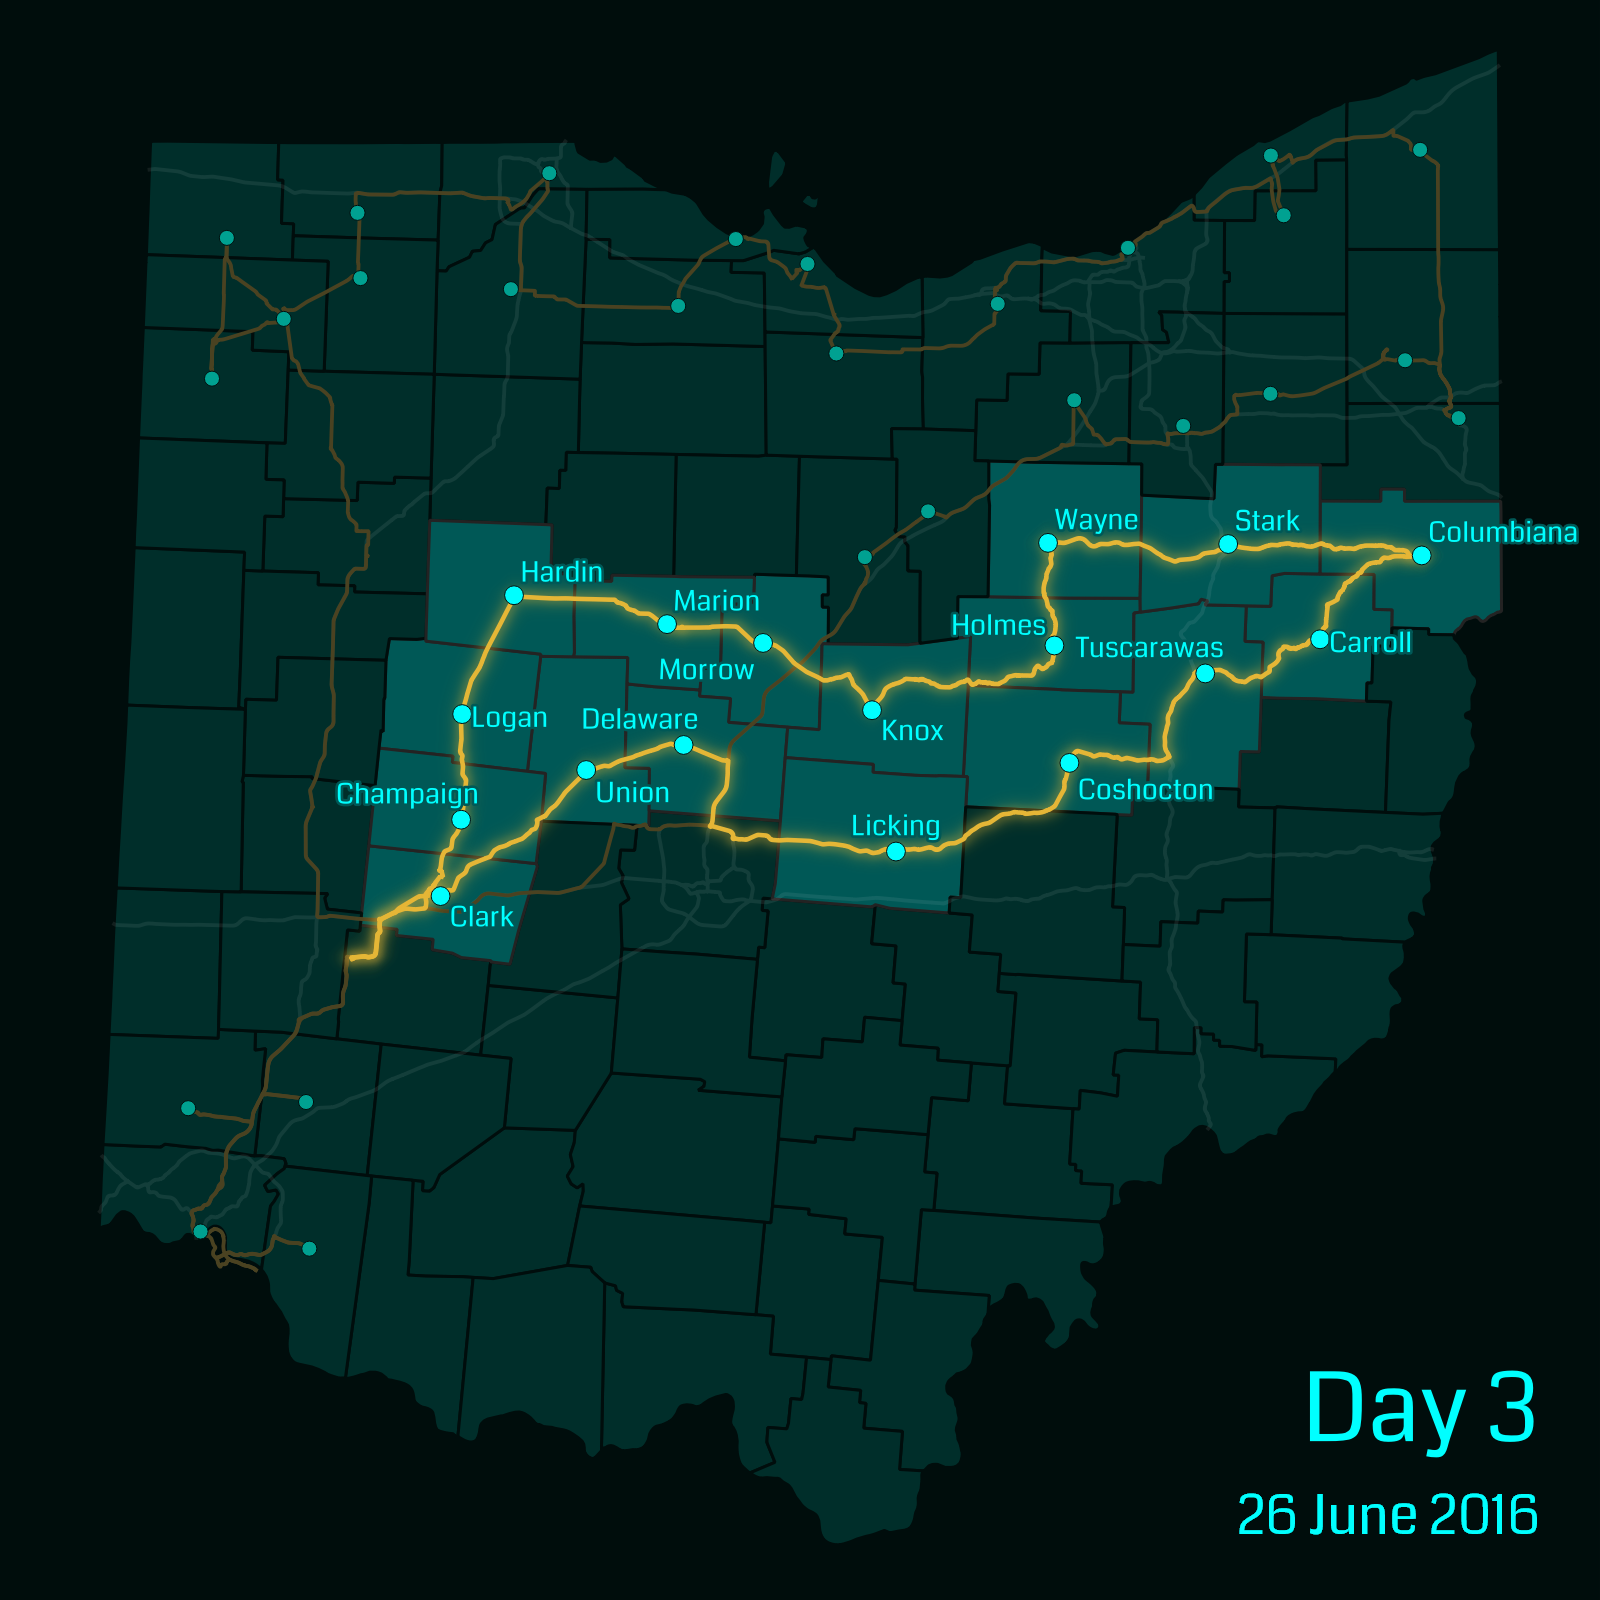 Ohio map showing a route through the following counties: Clark, Union, Delaware, Licking, Coshocton, Tuscarawas, Carroll, Columbiana, Stark, Wayne, Holmes, Knox, Morrow, Marion, Hardin.